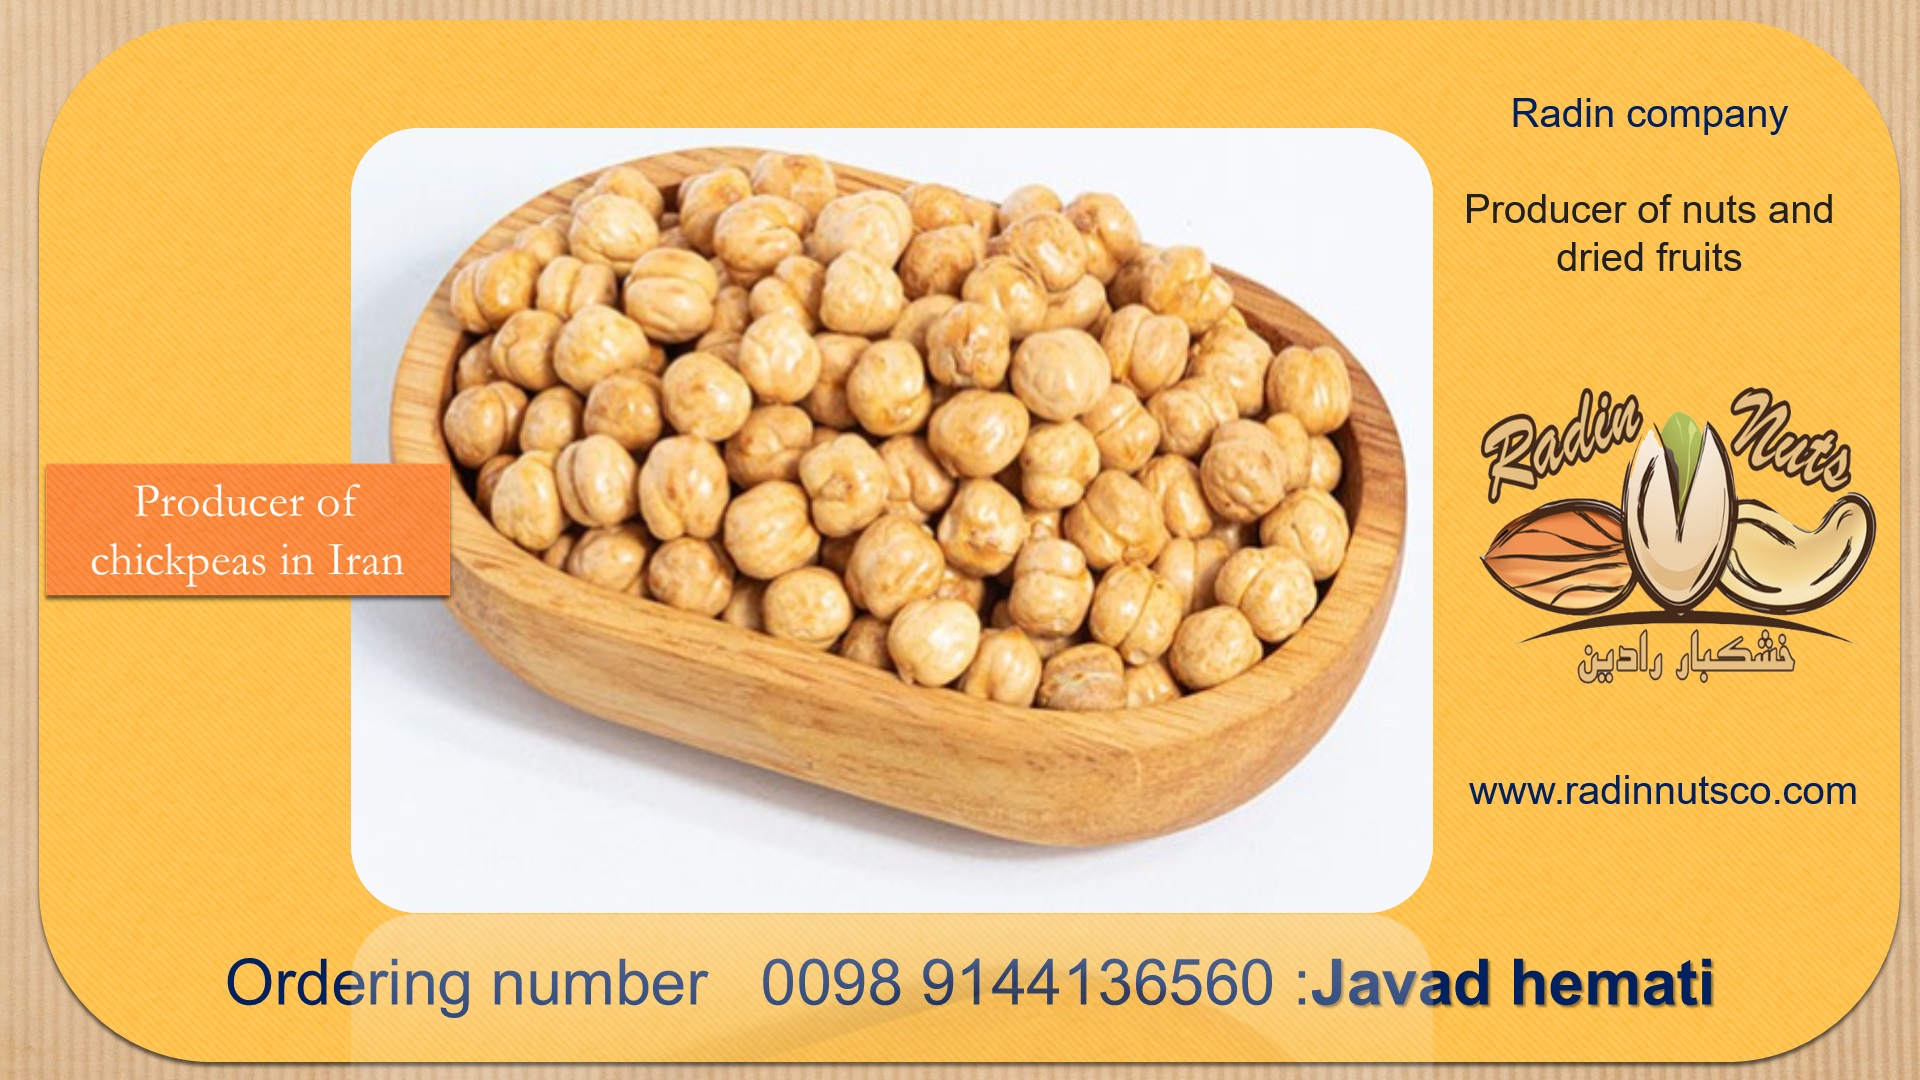 Wholesale sale of chickpeas with many properties